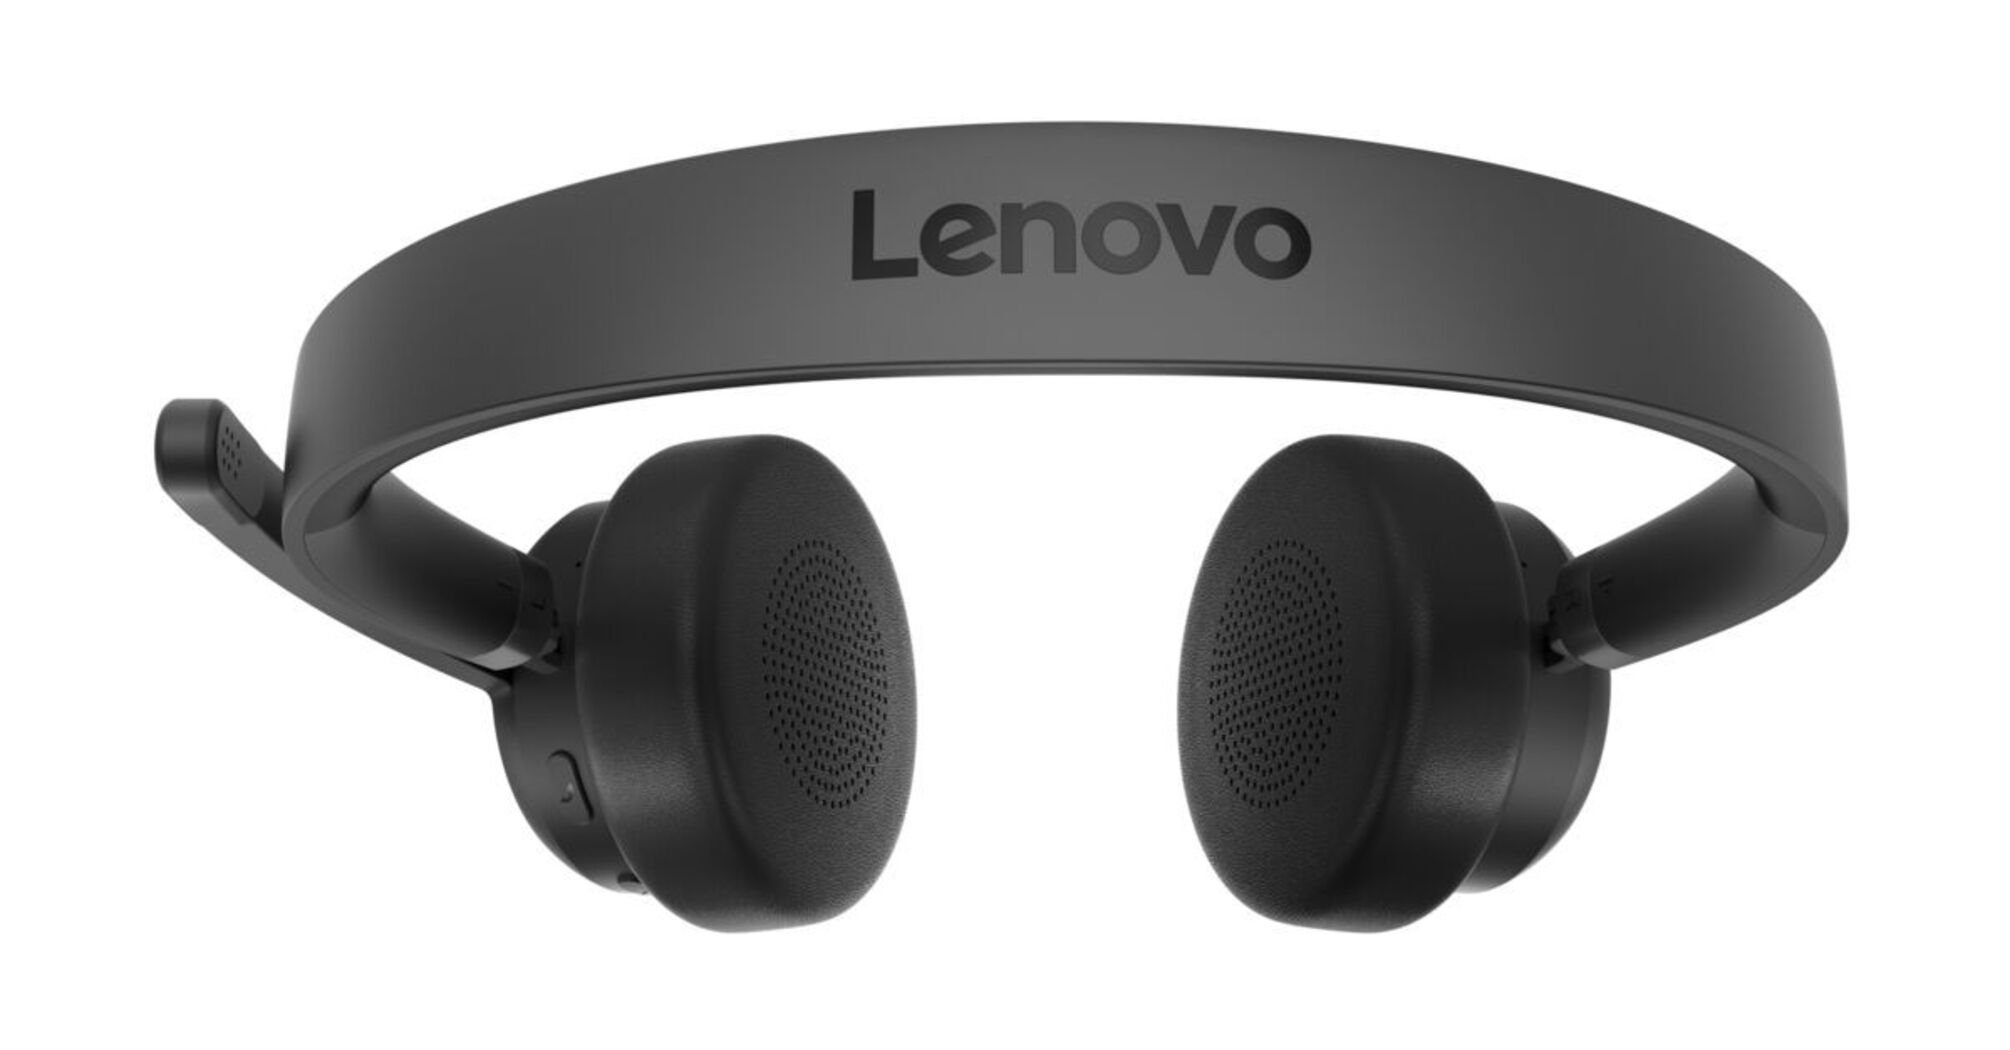 Lenovo Wireless VoIP headset: a product with long-lasting battery